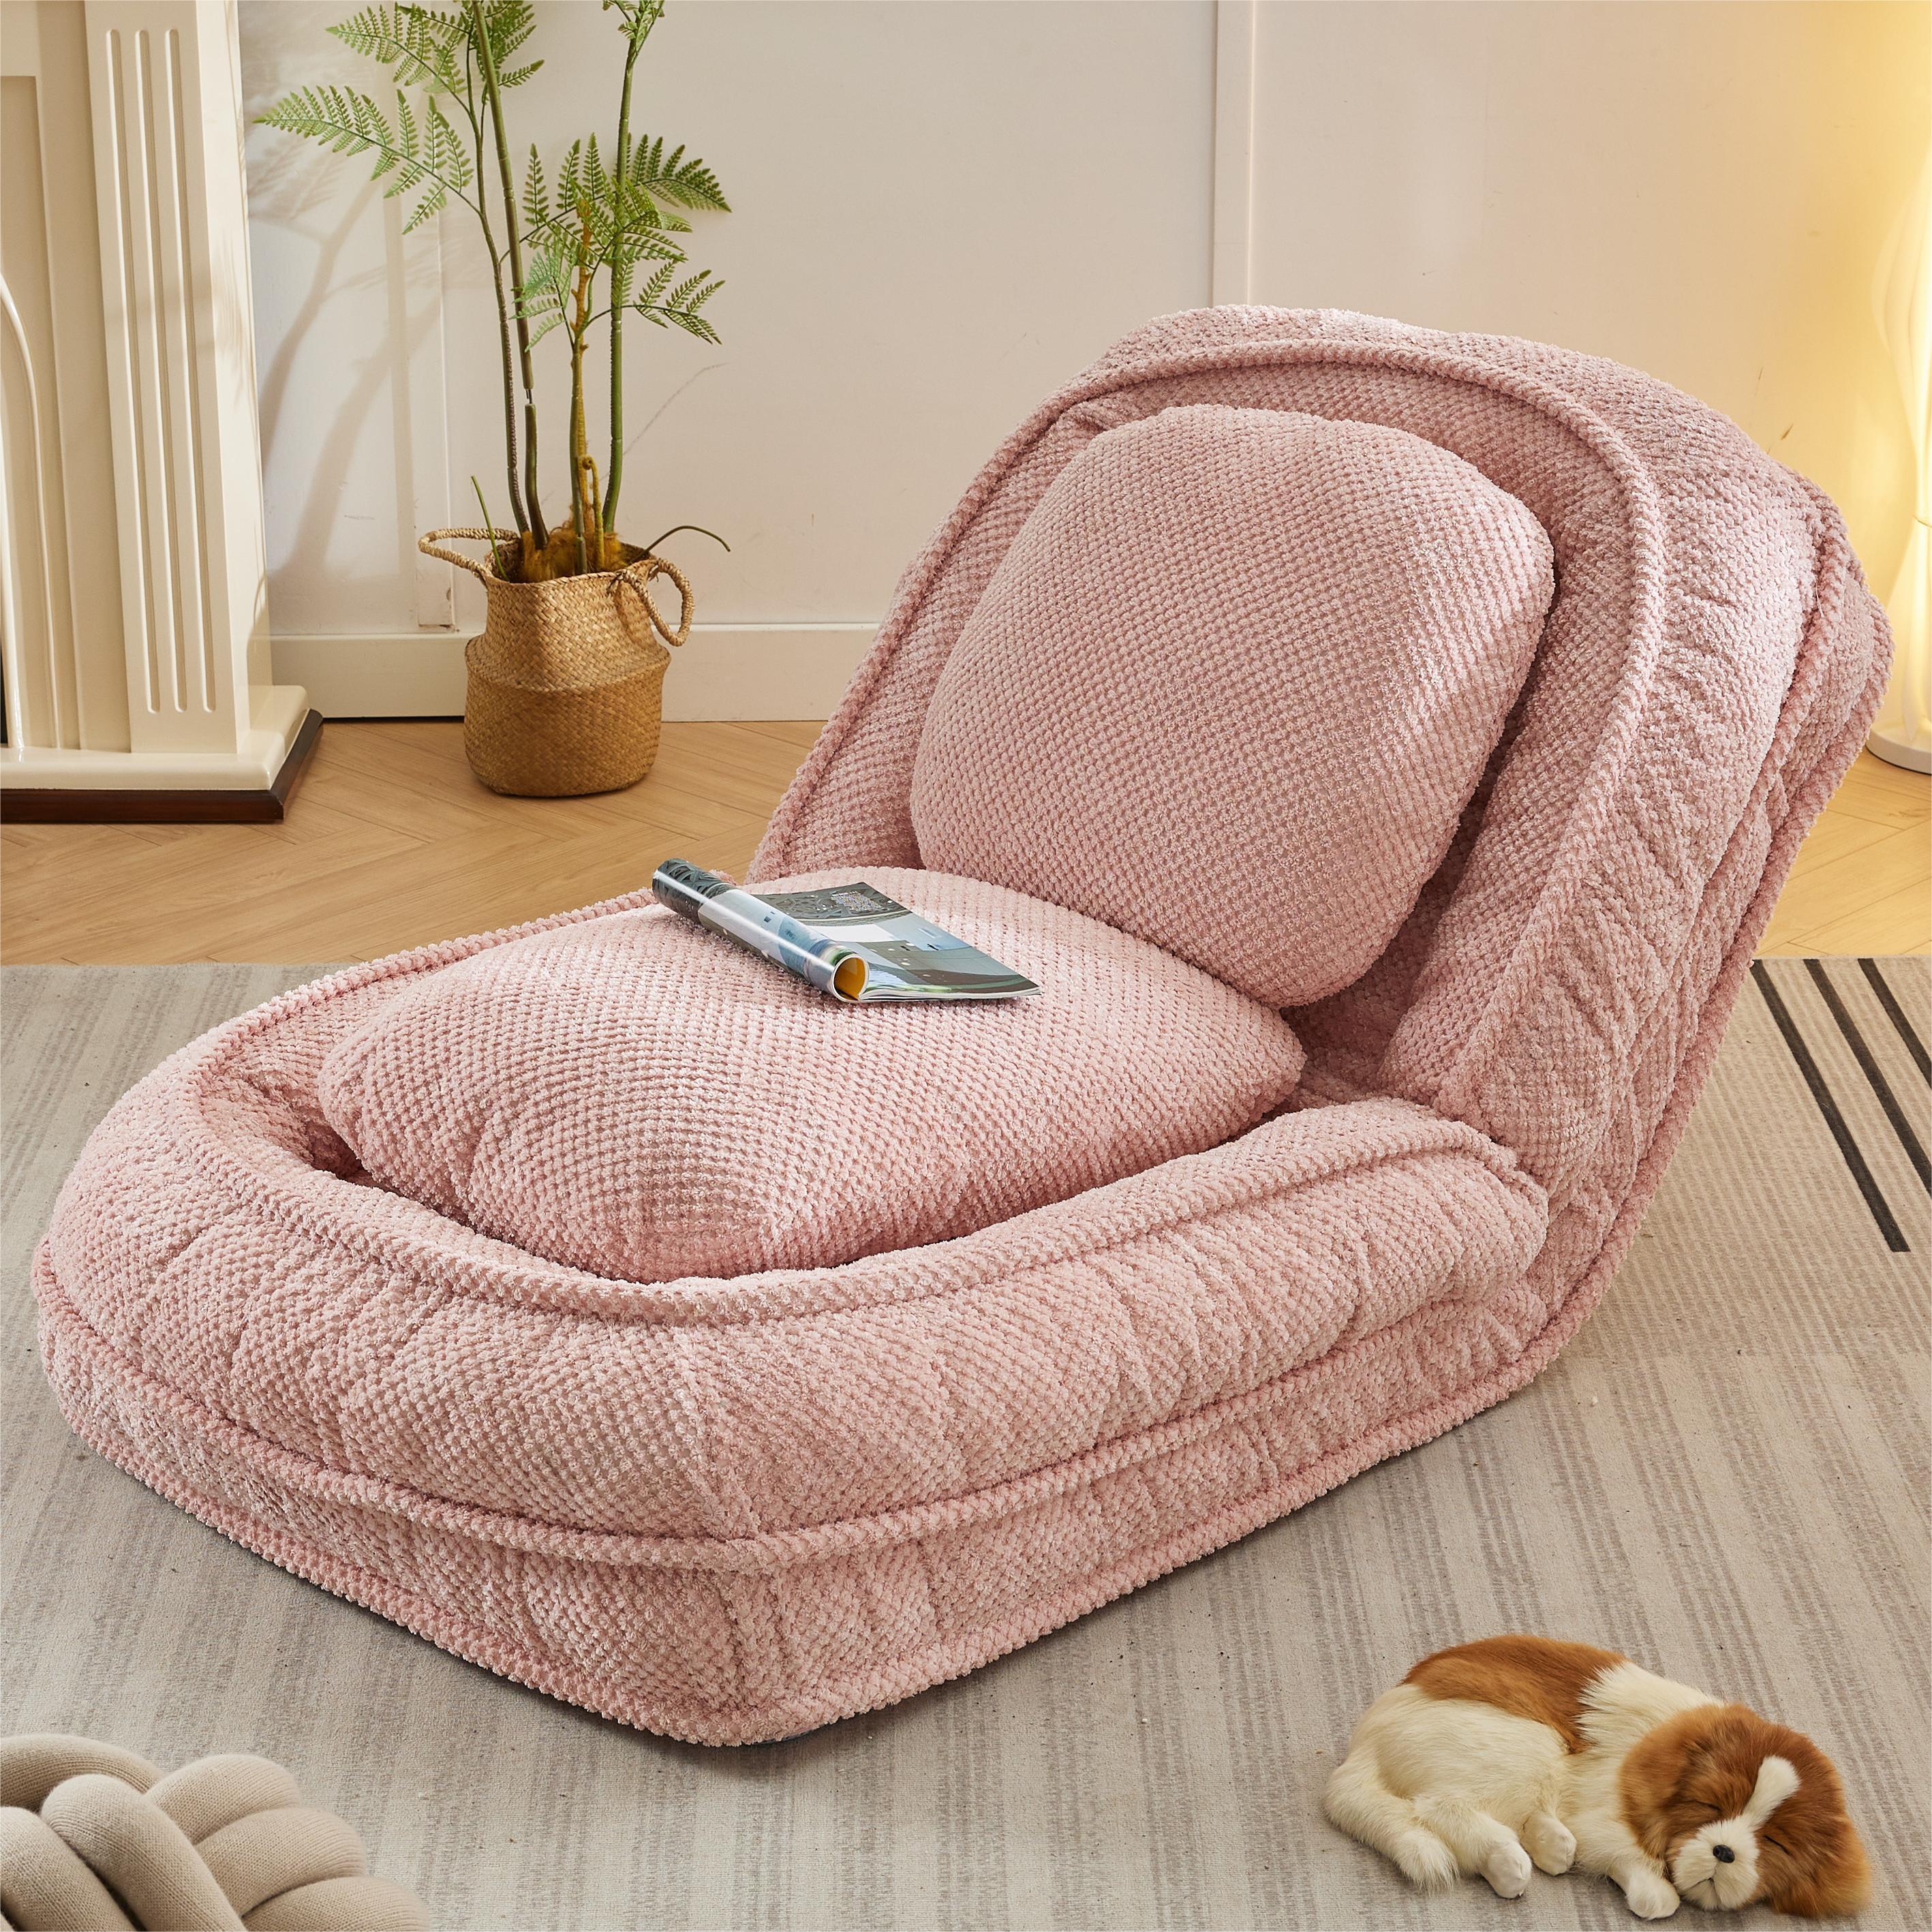 🆓🚛 Human Dog Bed, Lazy Sofa Couch, 5 Adjustable Position, Sit, Sleep, Fold, Suit To Put In Bedroom, Living Room, Space Saving Design, Pink